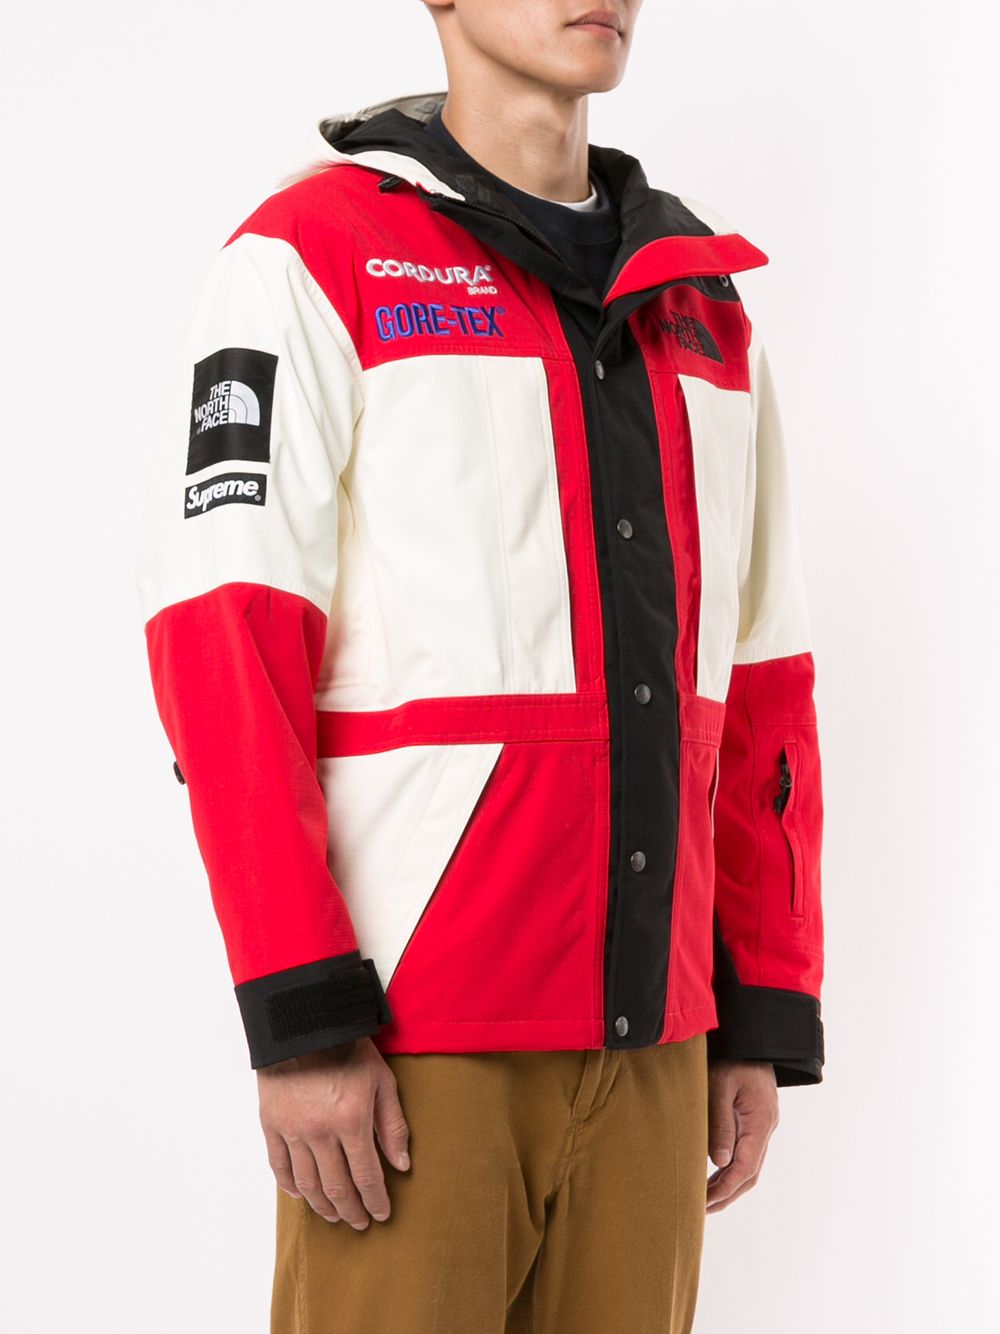 Shop Supreme x The North Face Expedition jacket with Express 